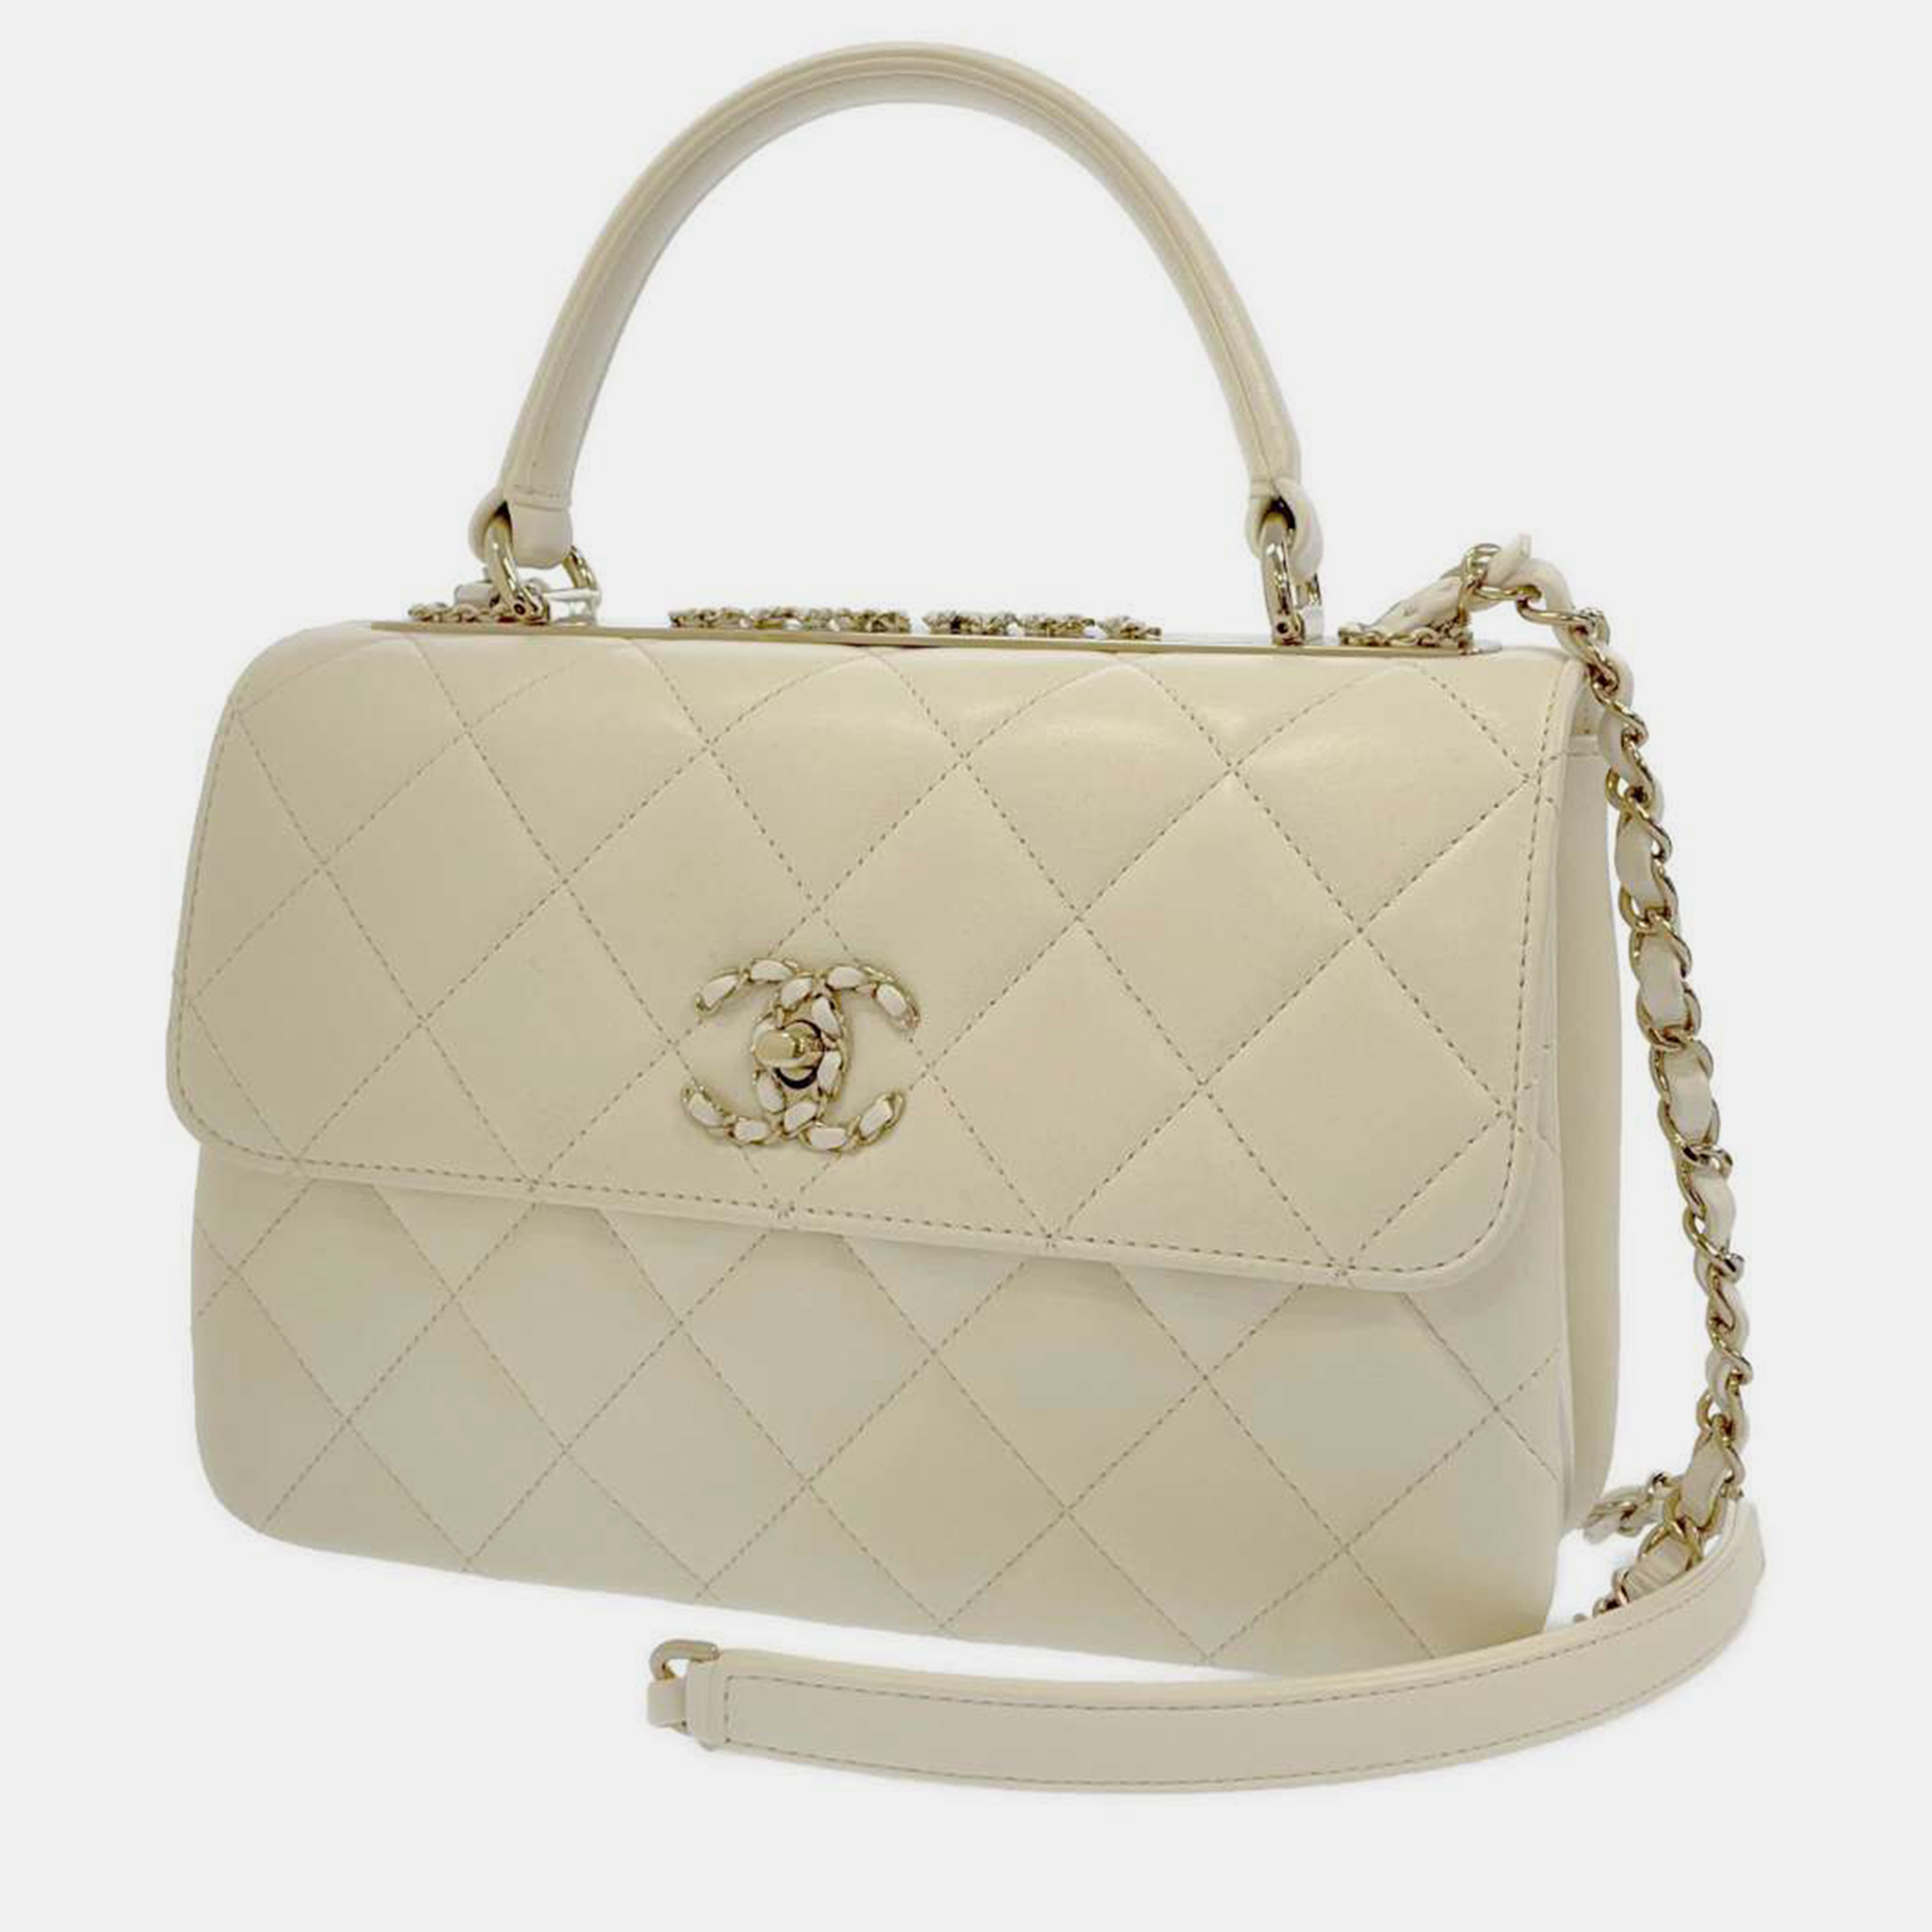 Pre-owned Chanel White Leather Small Trendy Cc Shoulder Bag